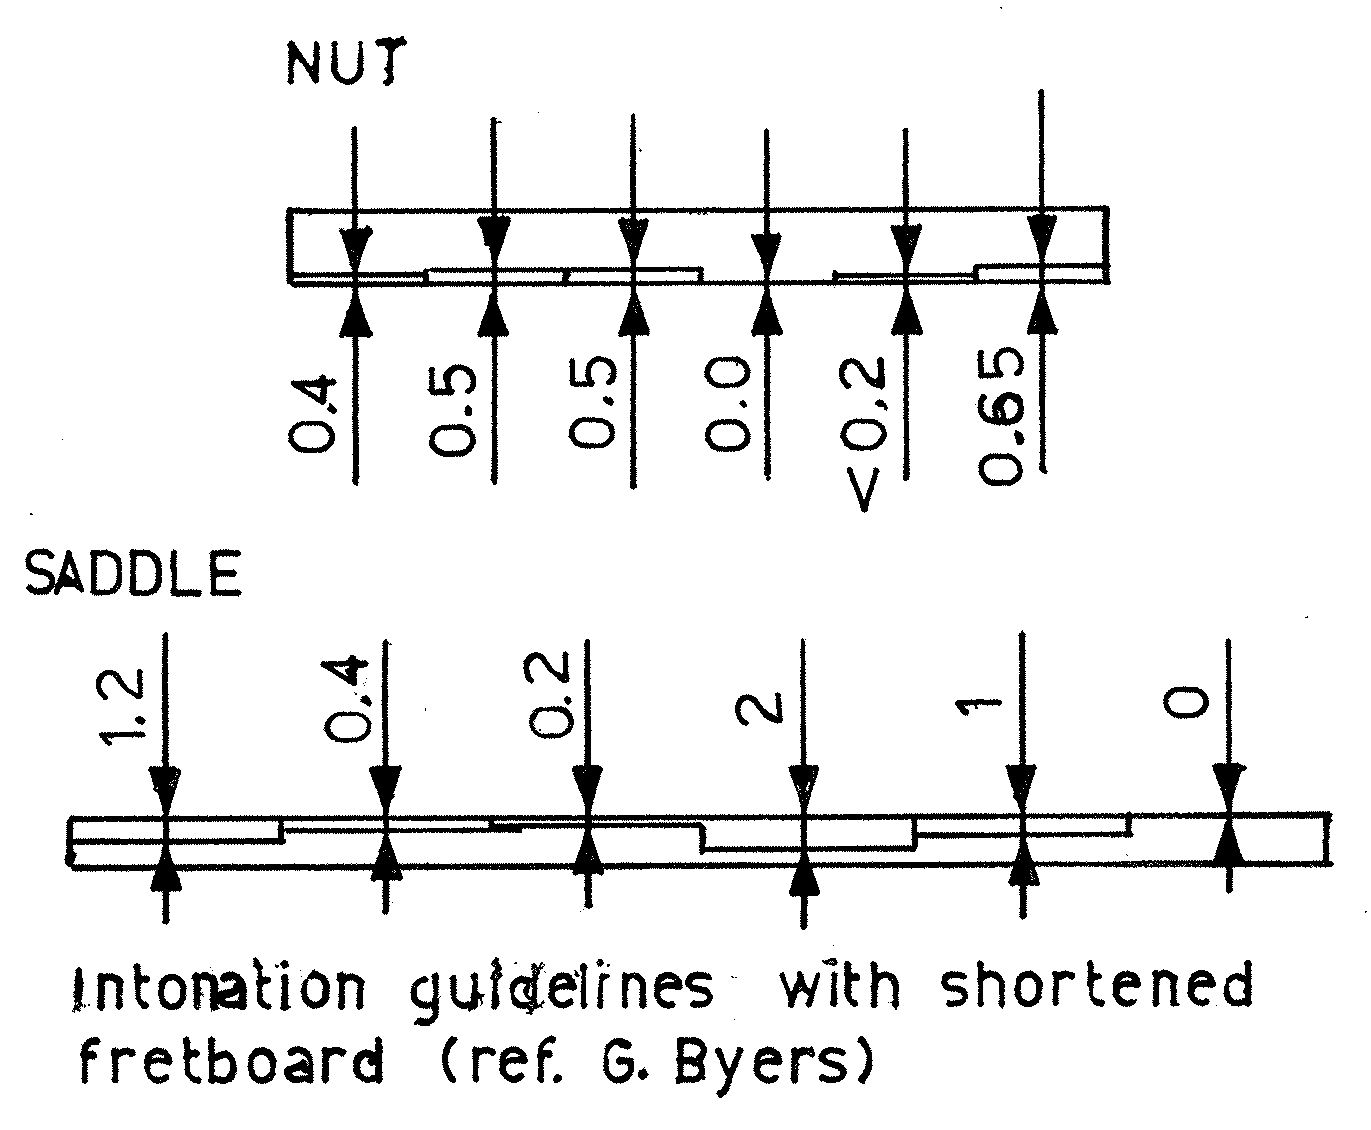 Recommended nut and bridge compensation shown diagramatically